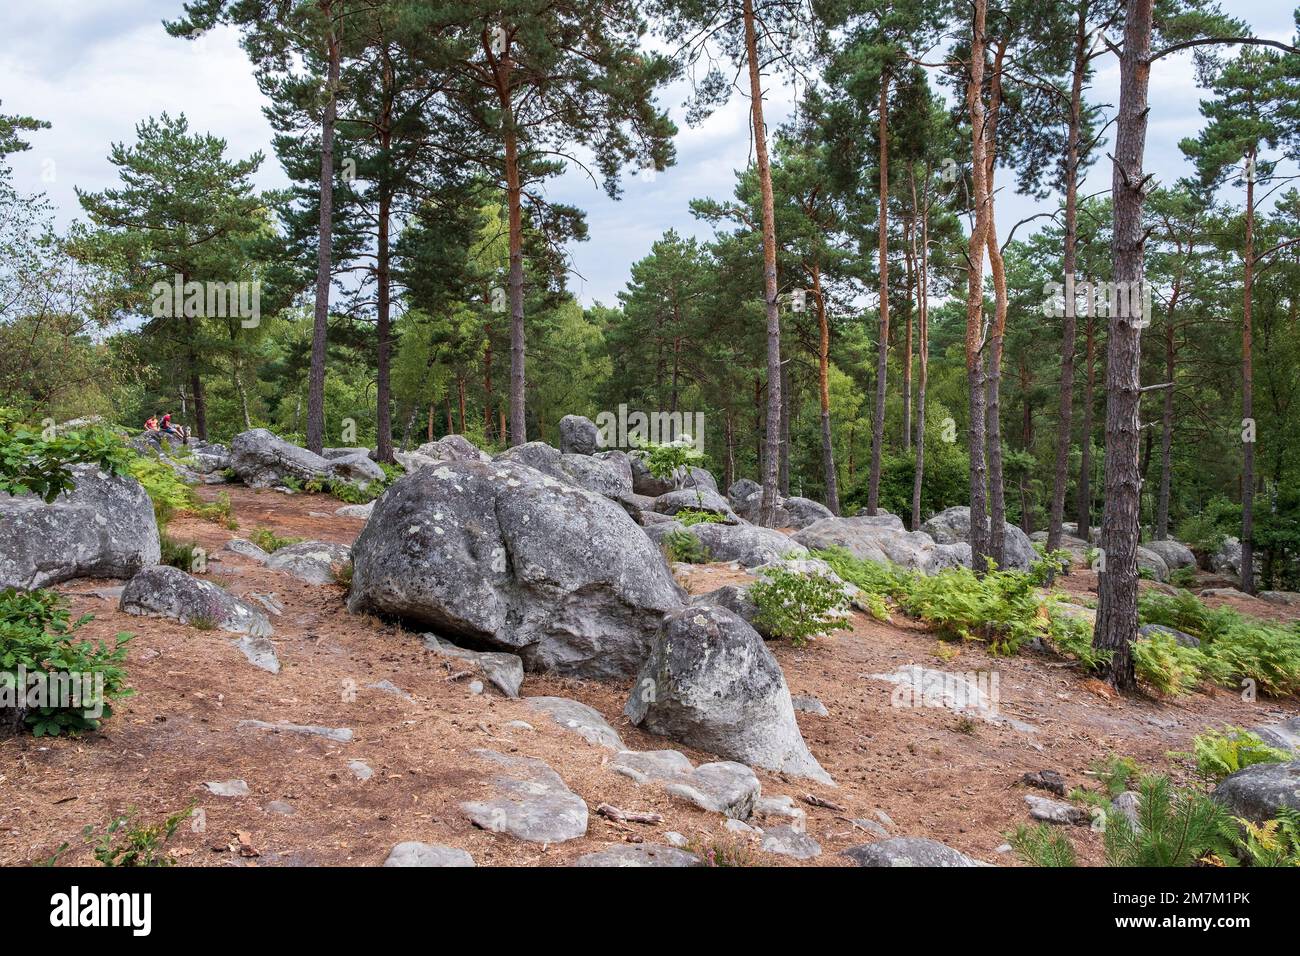 The forest of Fontainebleau, Cave of the Brigands, Bas-Breau, near Barbizon. Rocks and trees, pines and ferns. Stock Photo